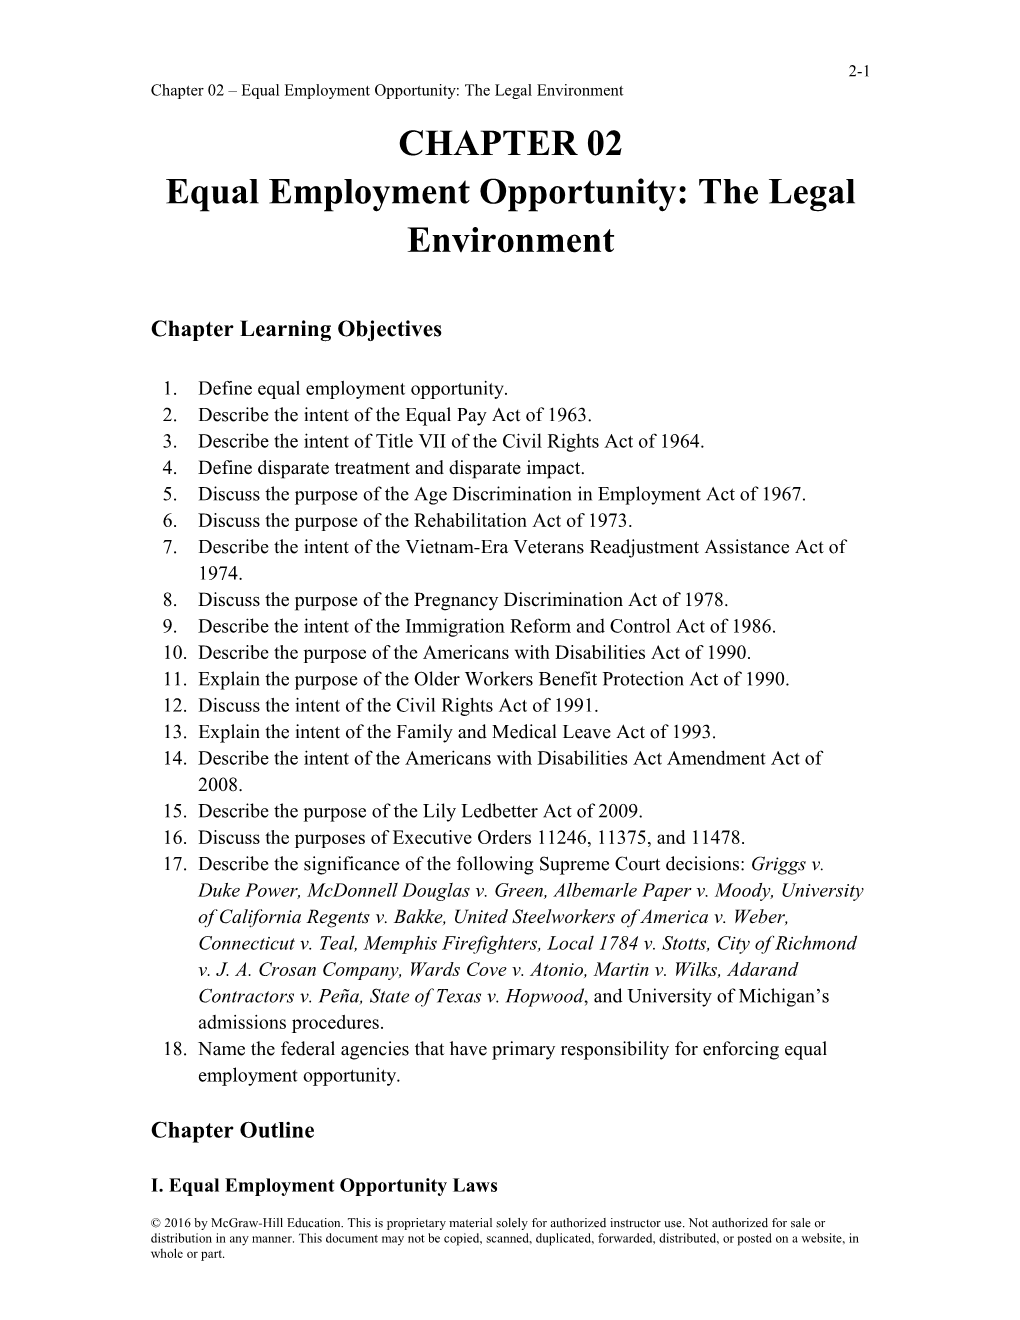 Equal Employment Opportunity: the Legal Environment